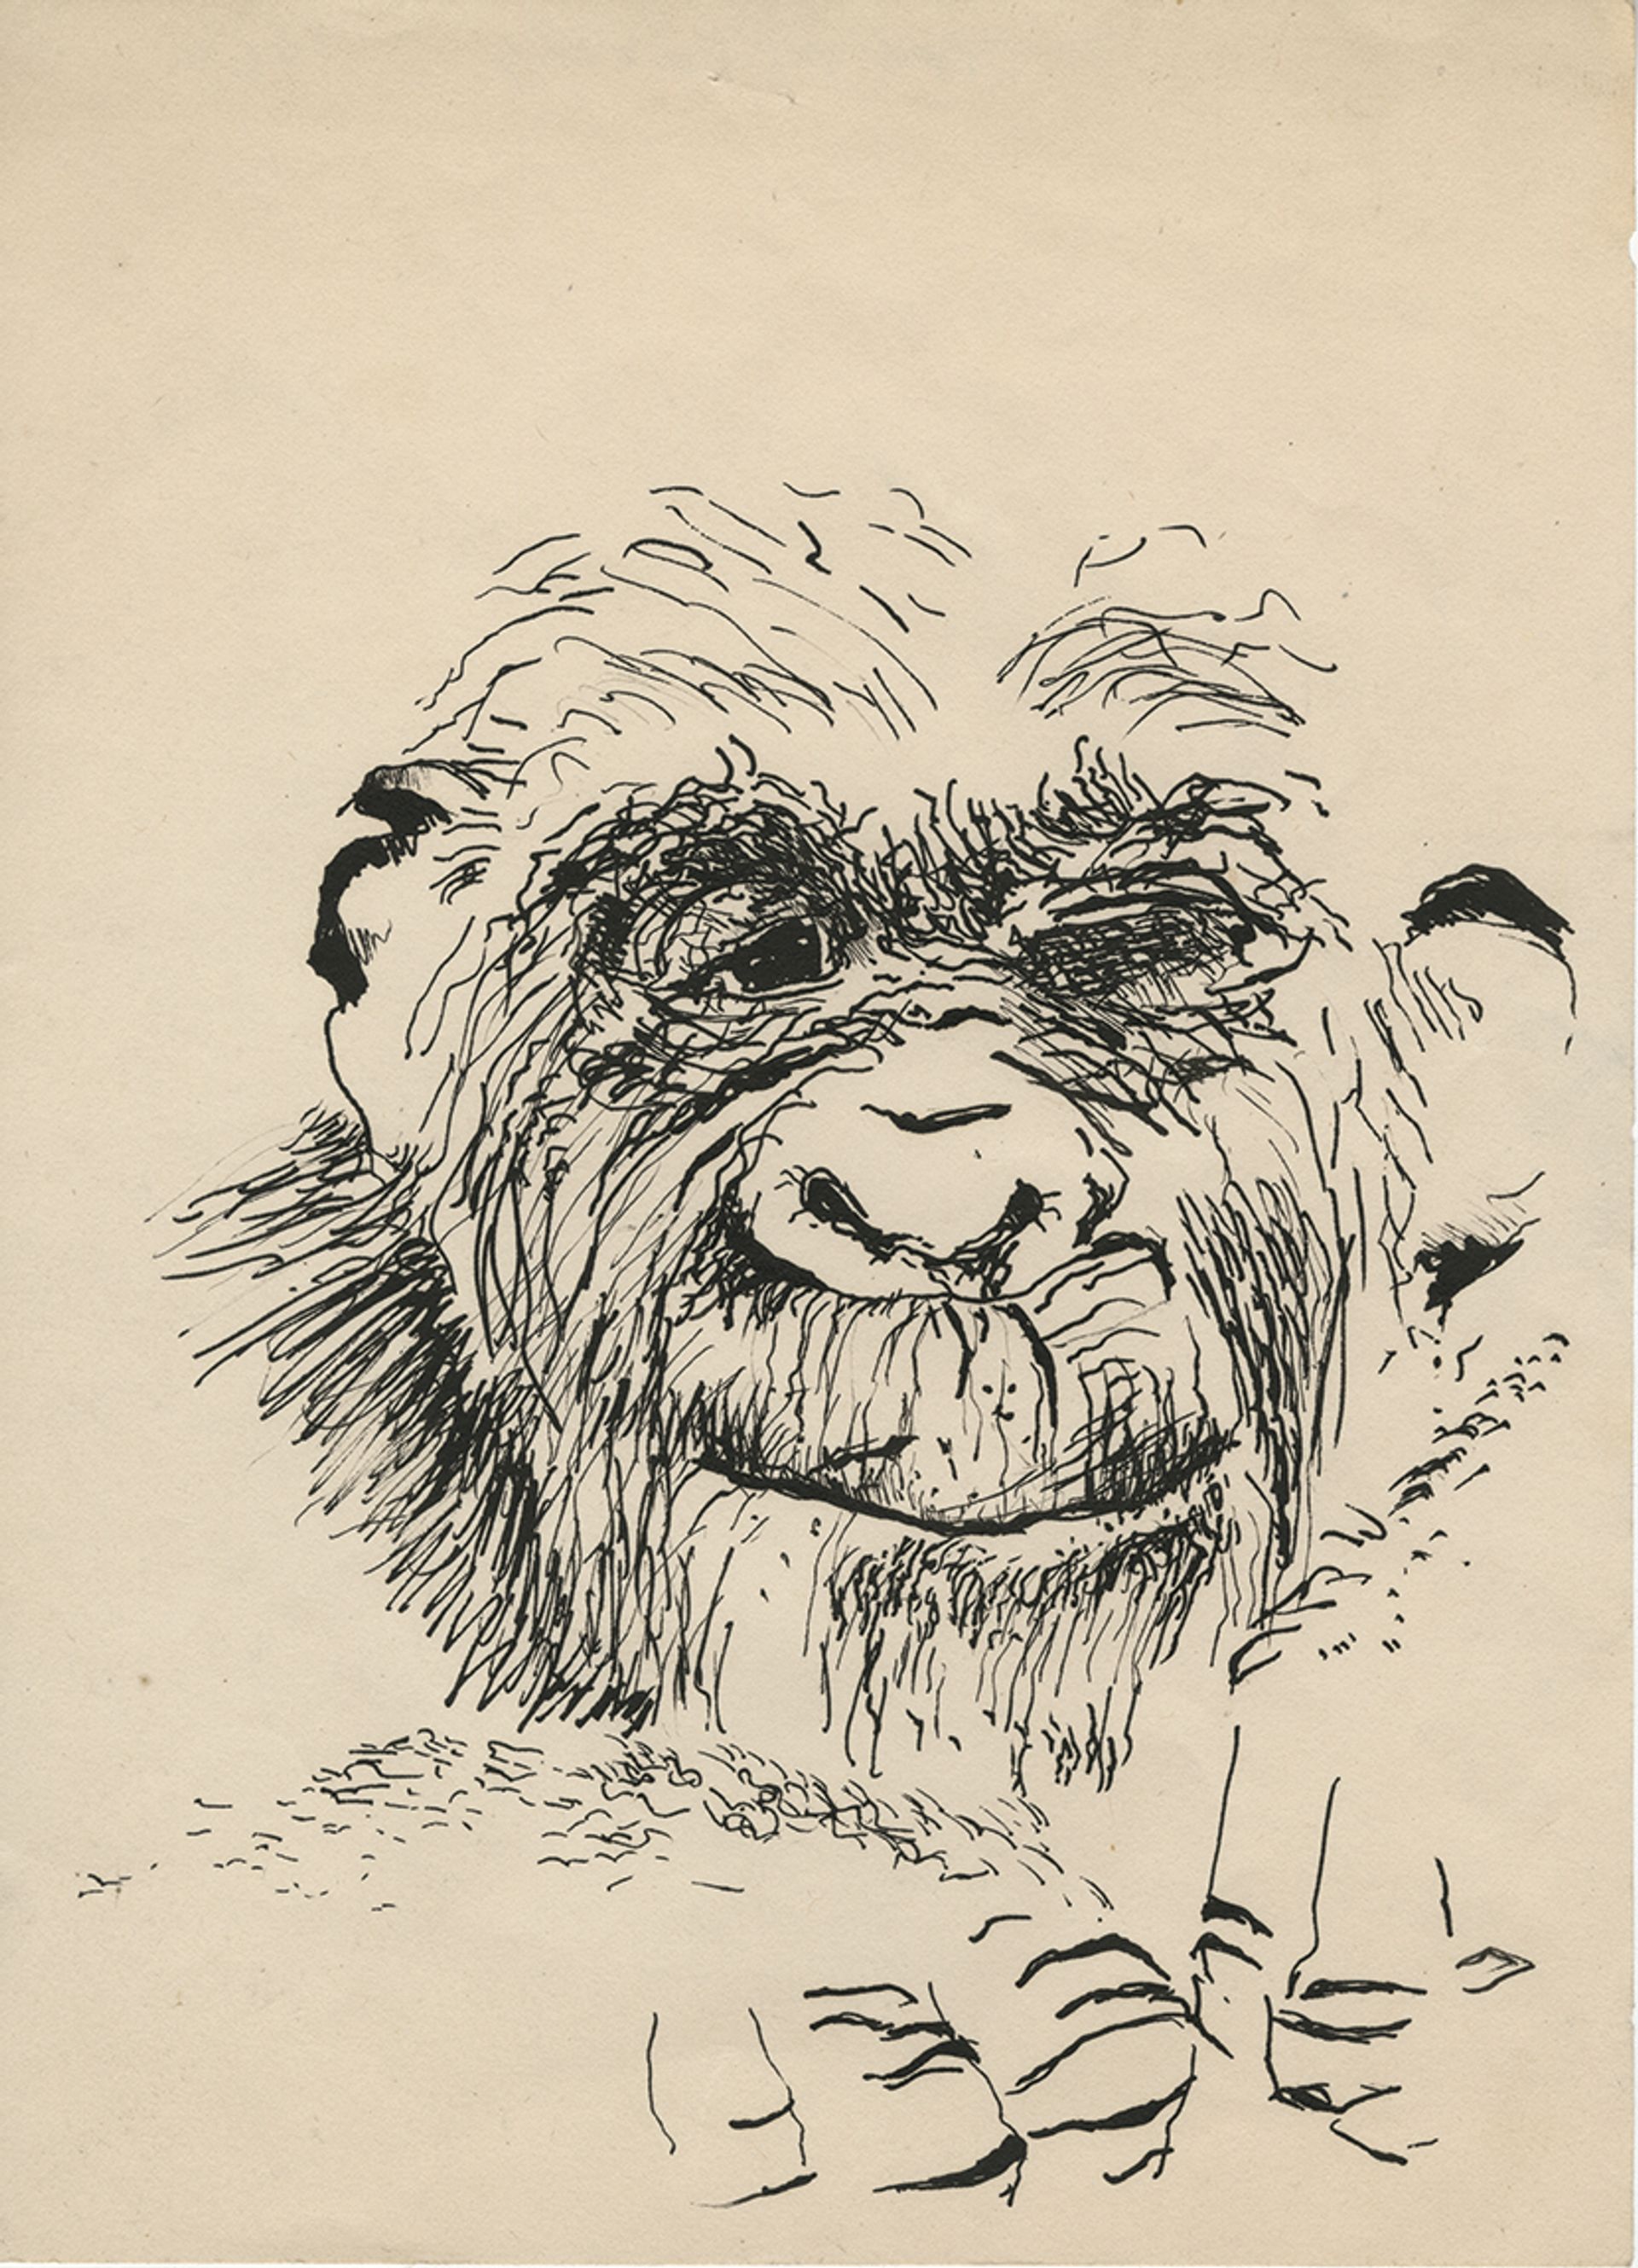 Paul McCarthy, Self-Portrait (1963), ink on paper Courtesy of the artist and Hauser & Wirth